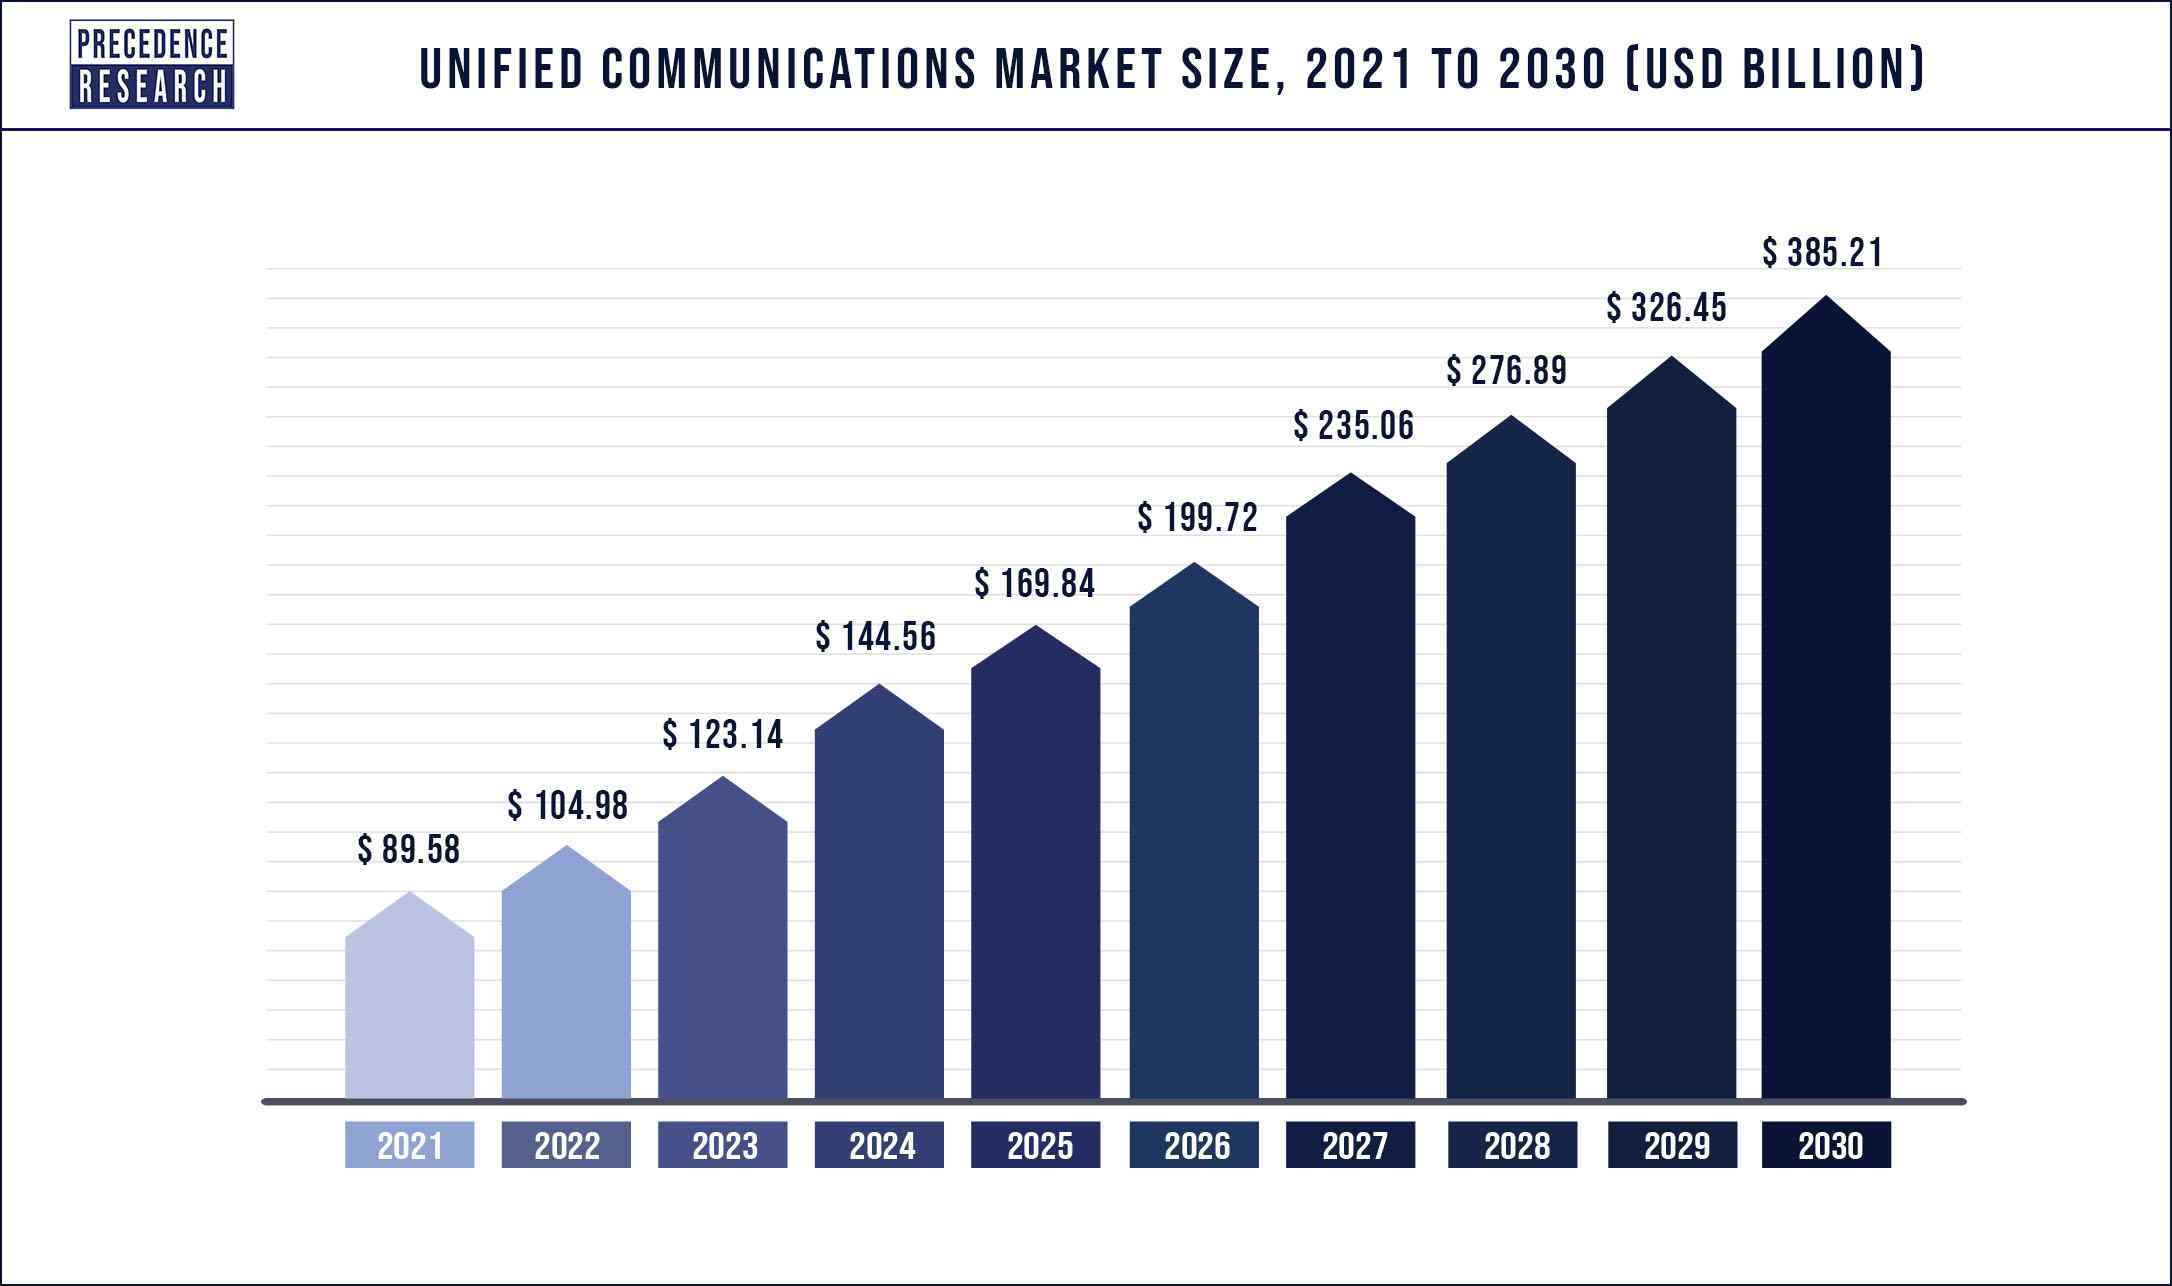 Unified Communications Market Size 2021 to 2030